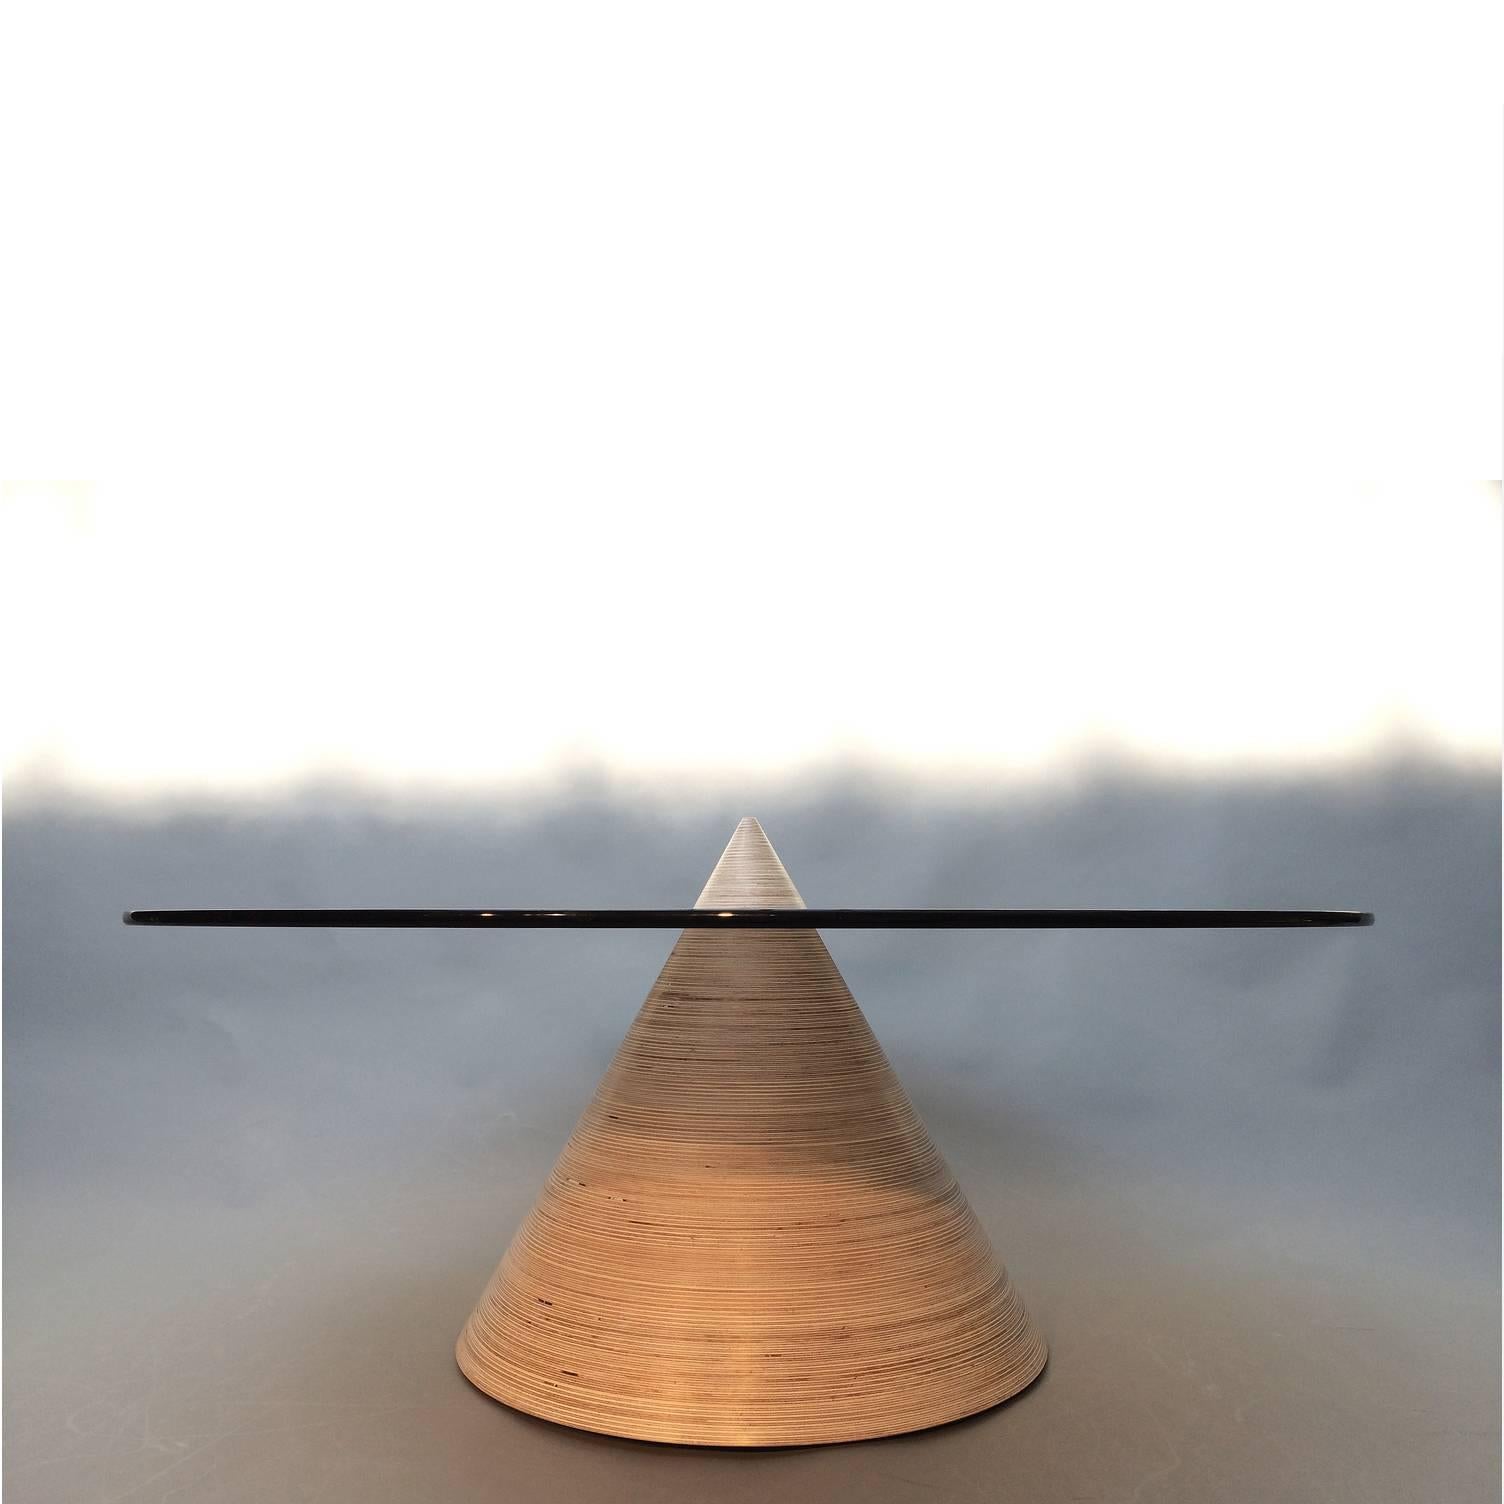 Not So General Gallery in Los Angeles is proud to present the Halo coffee table by Brooklyn-based design practice, Erickson Aesthetics which appears to be a feat of product design and engineering.

The pinnacle of the cone-shaped Laminated Birch